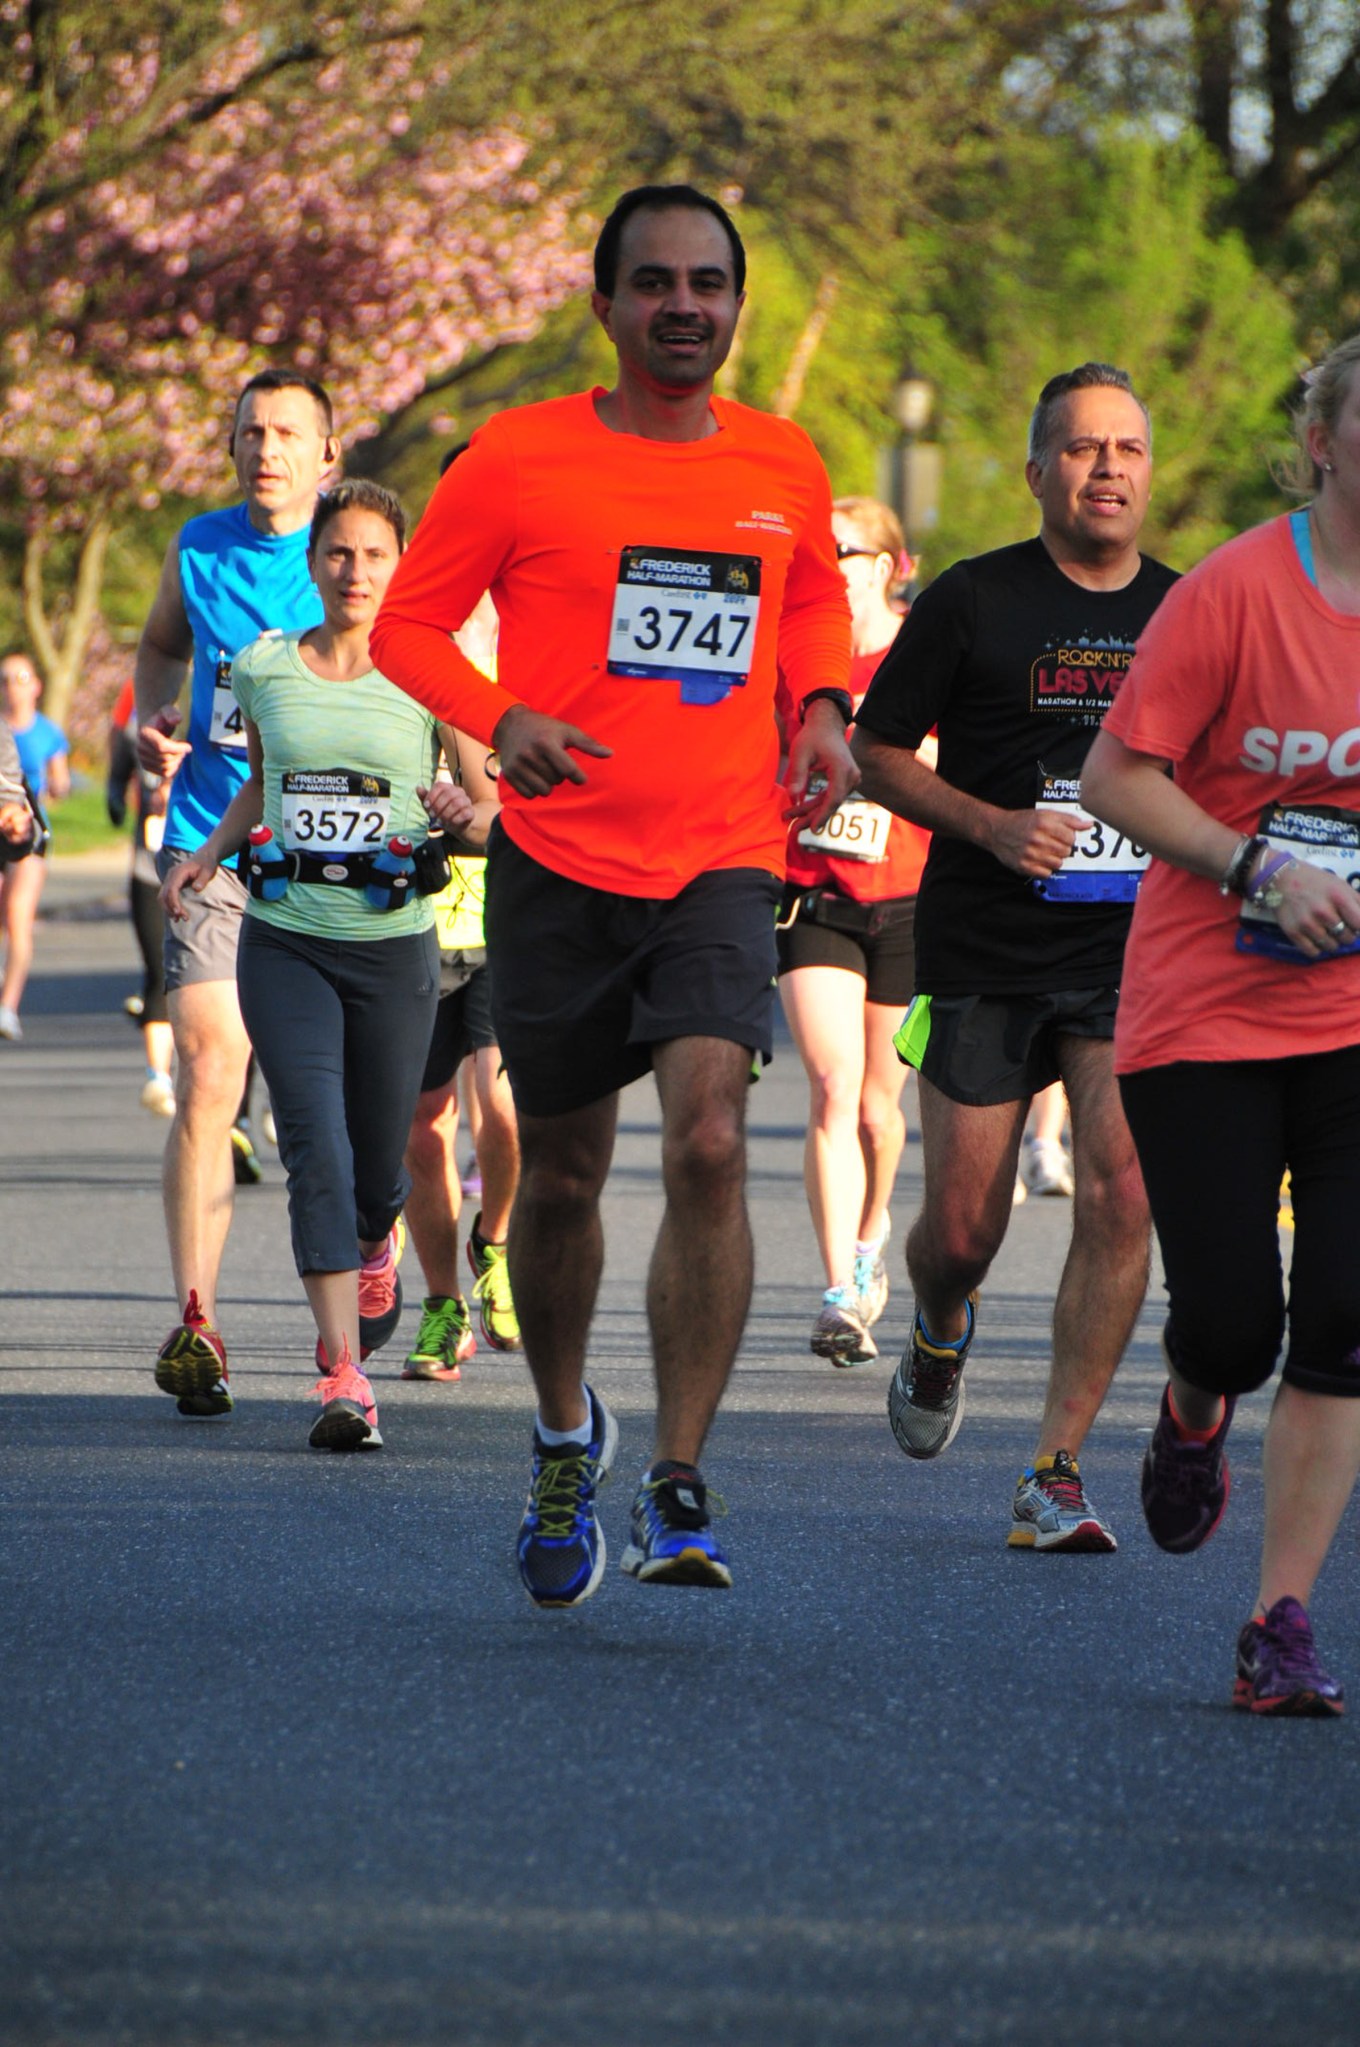 Man with tan skin and black hair wears an orange long sleeve shirt and black shorts and is running in a race. There are many other runners around him. 